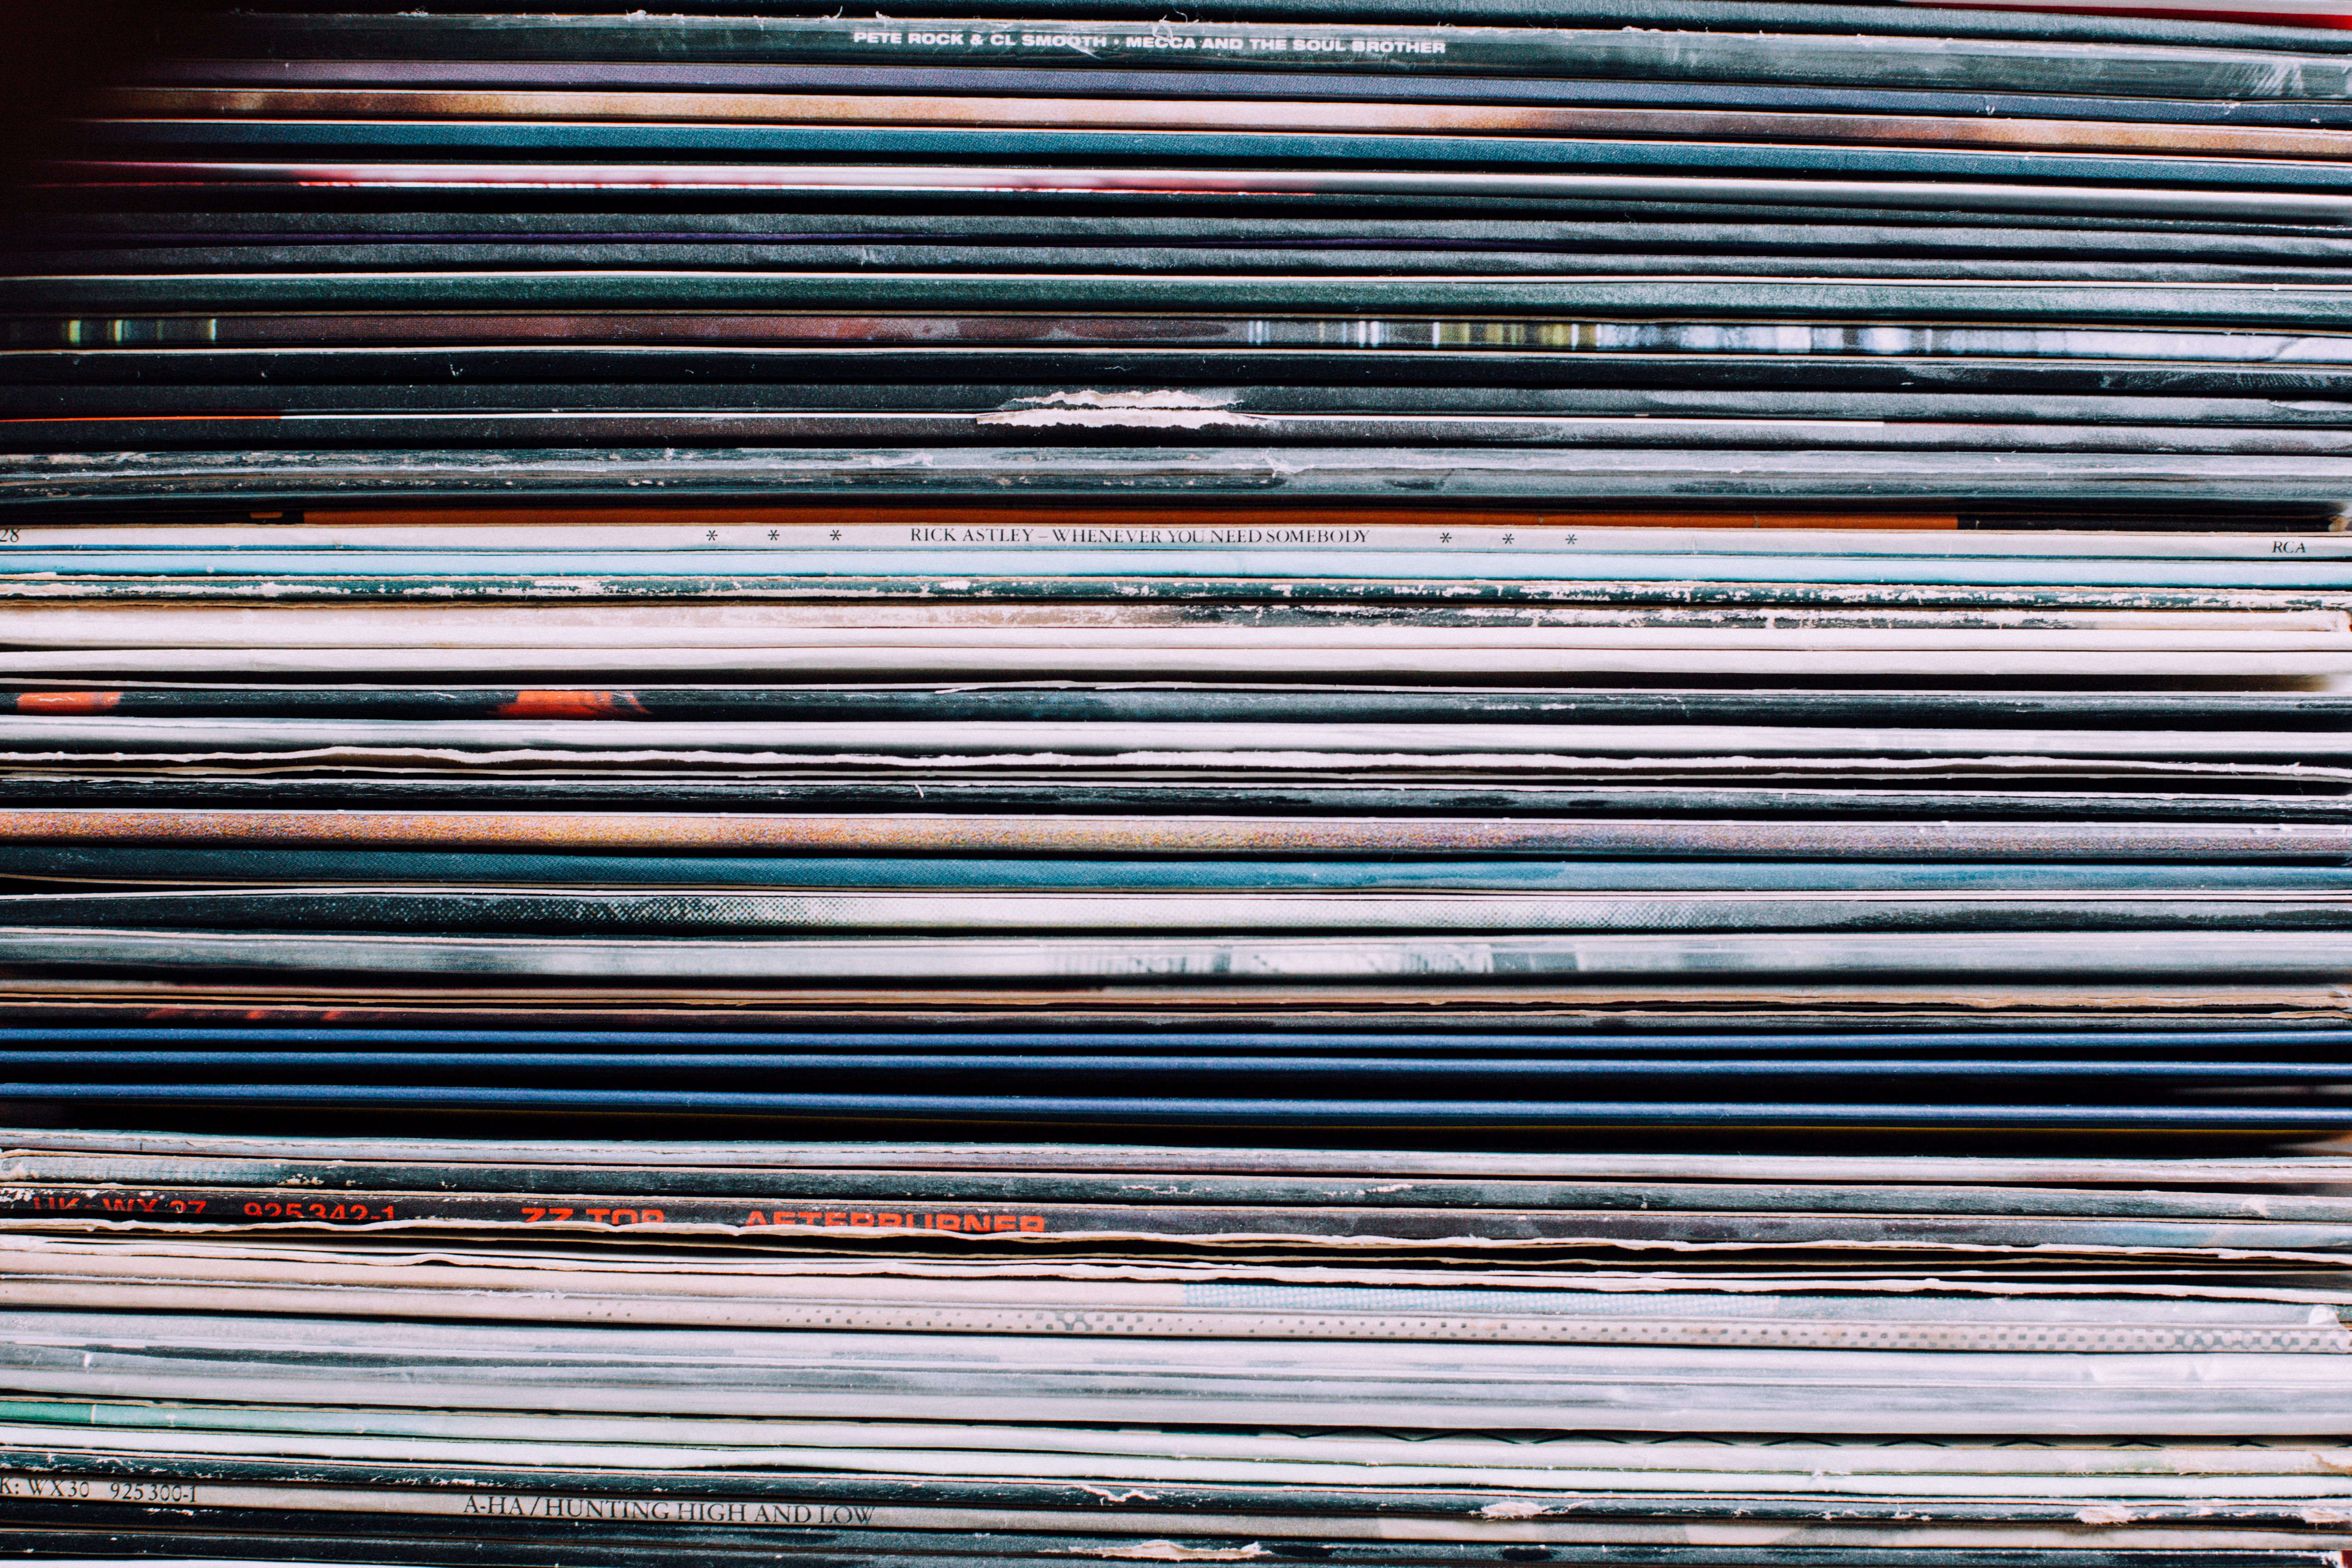 A background consisting of a stack of records in the city of Nancy, France, untitled